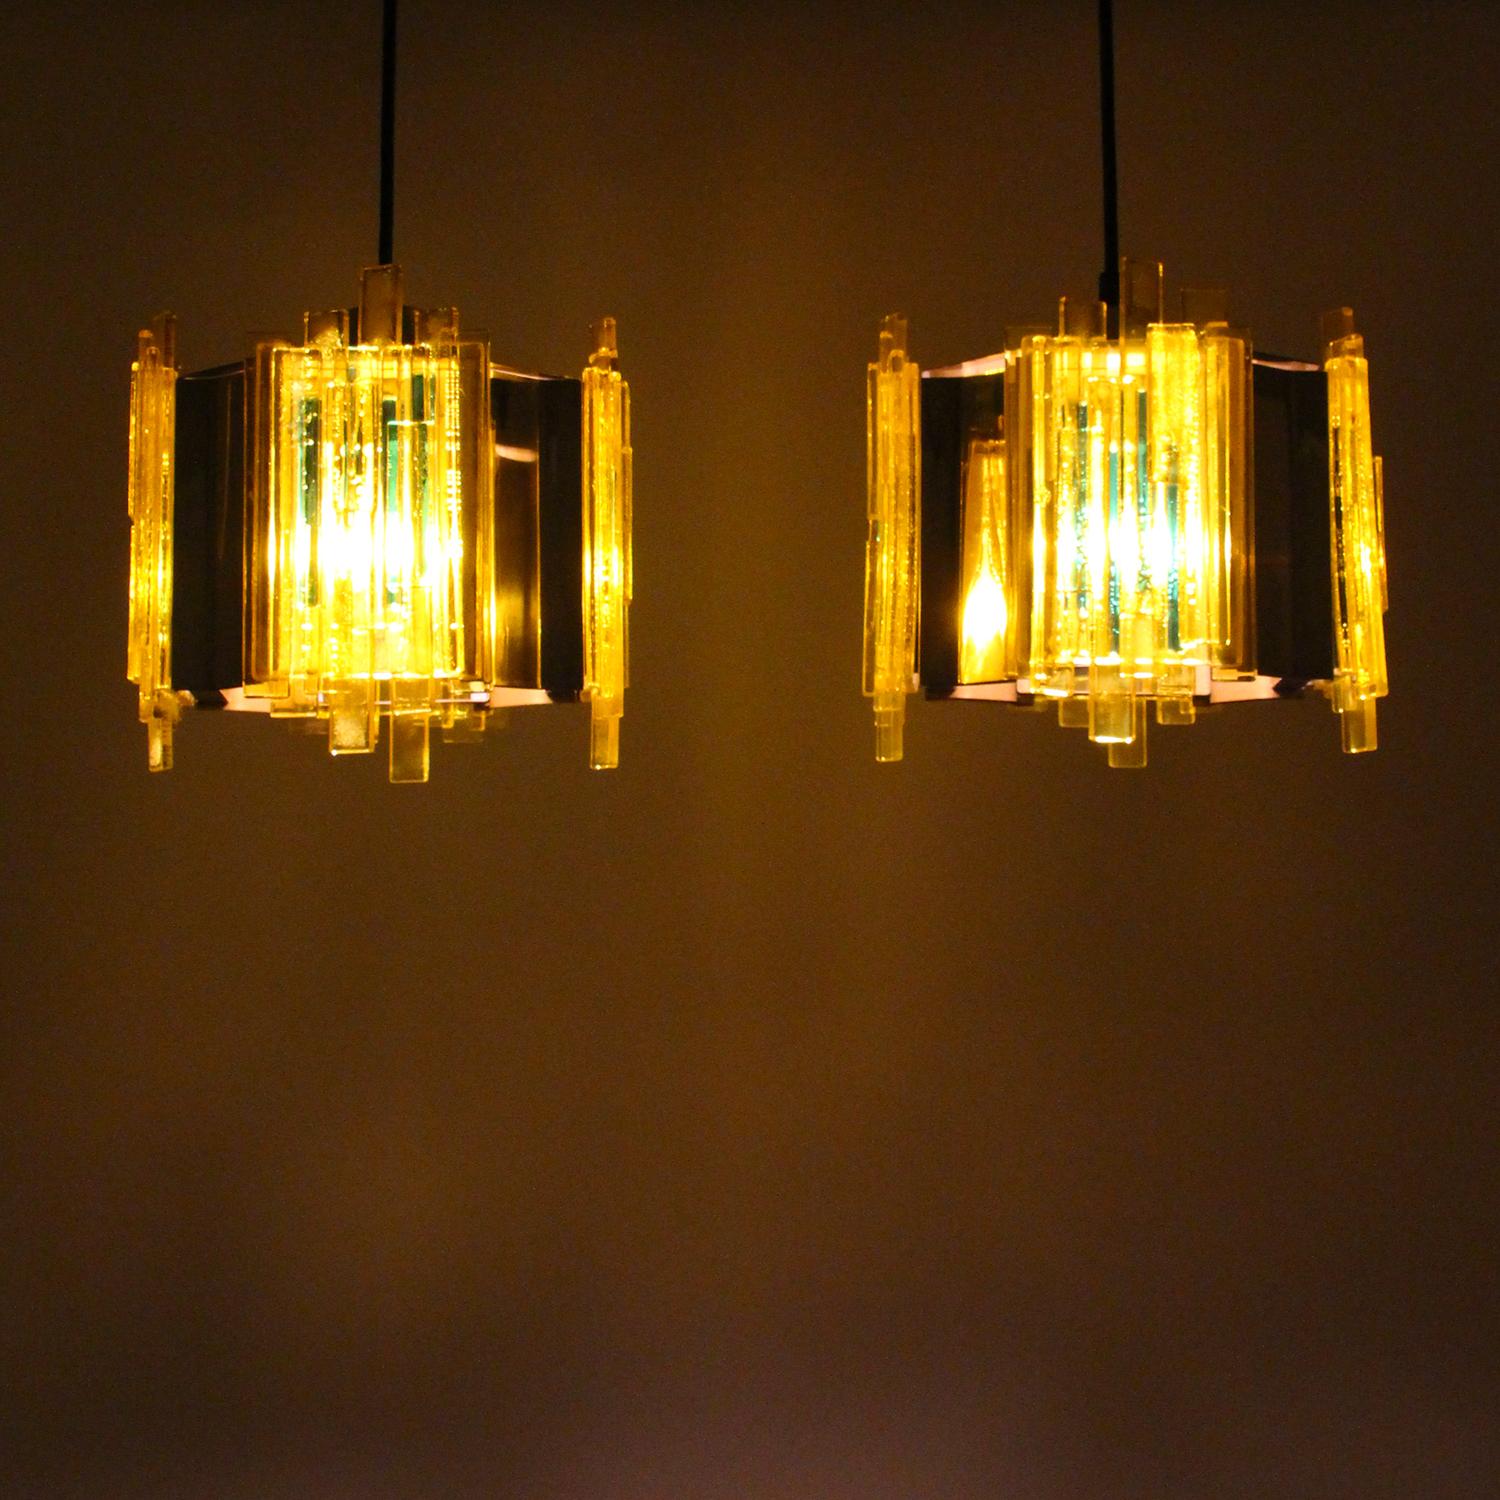 Yellow Plexiglas Pendant Pair by Claus Bolby for CEBO Industry in the 1970s (Lackiert)